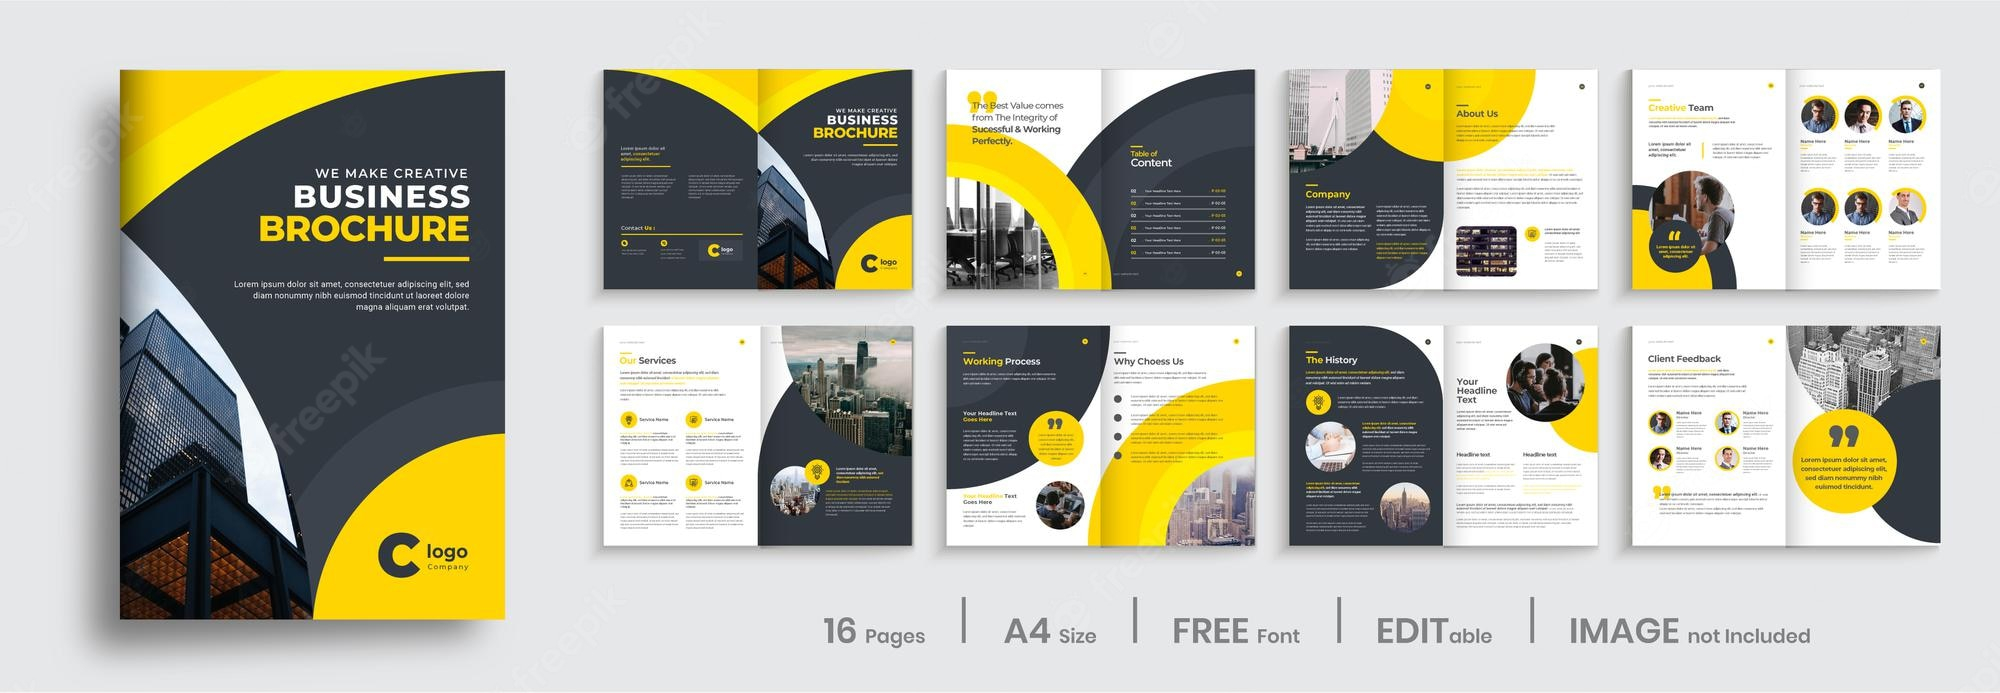 Brochure template Vectors & Illustrations for Free Download  Freepik Pertaining To Free Illustrator Brochure Templates Download